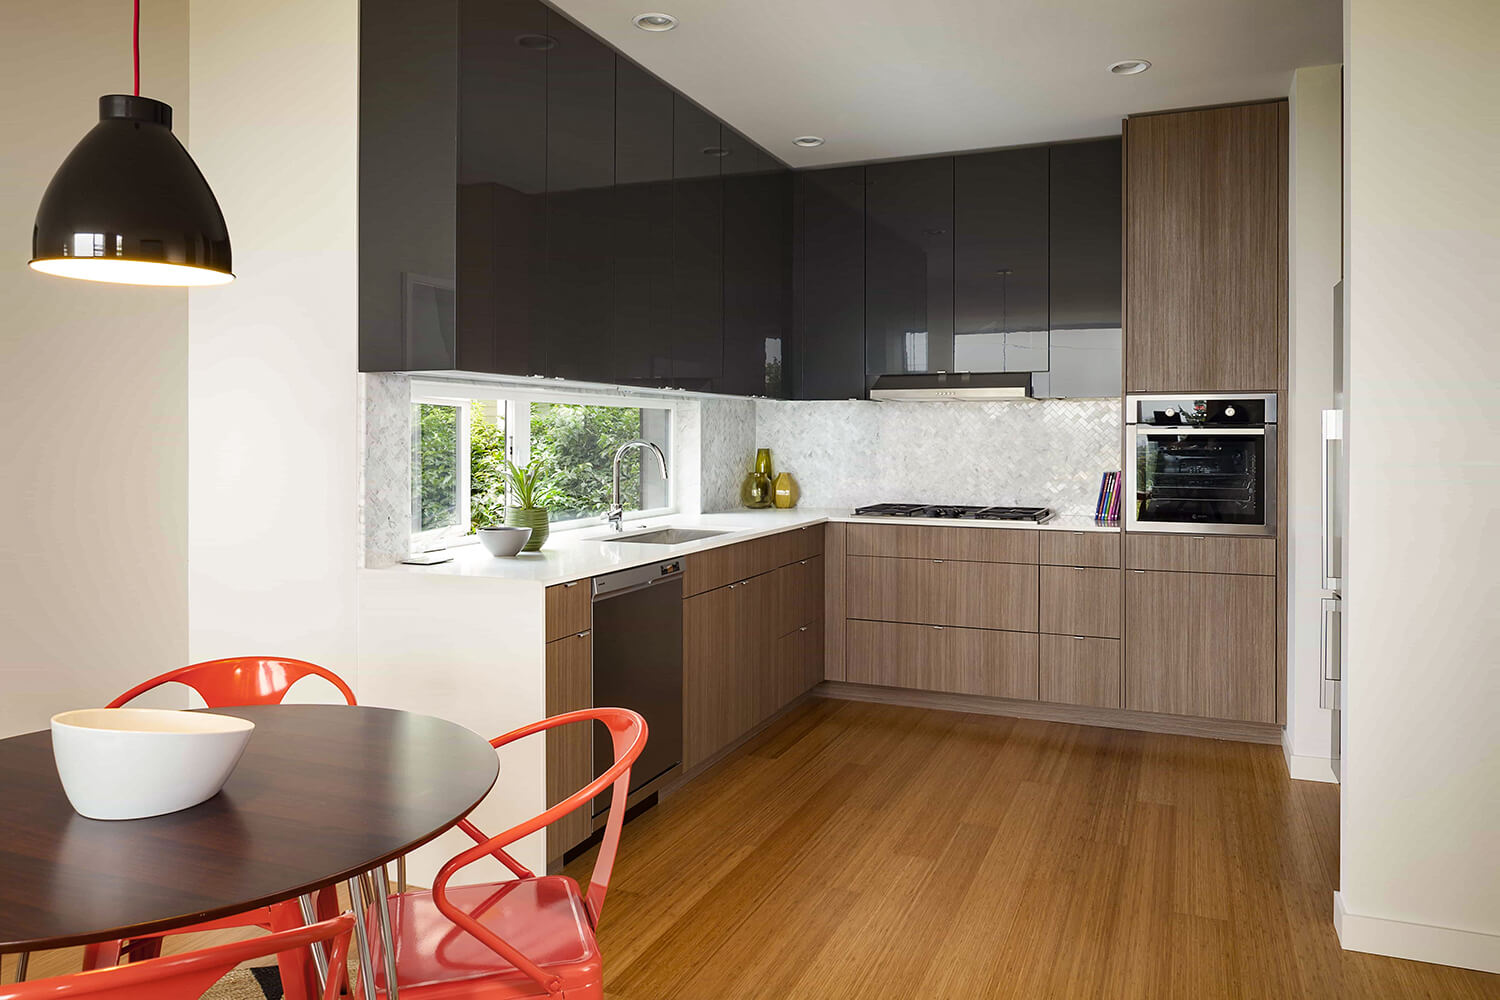 DSP Kitchens Single Family Projects Image